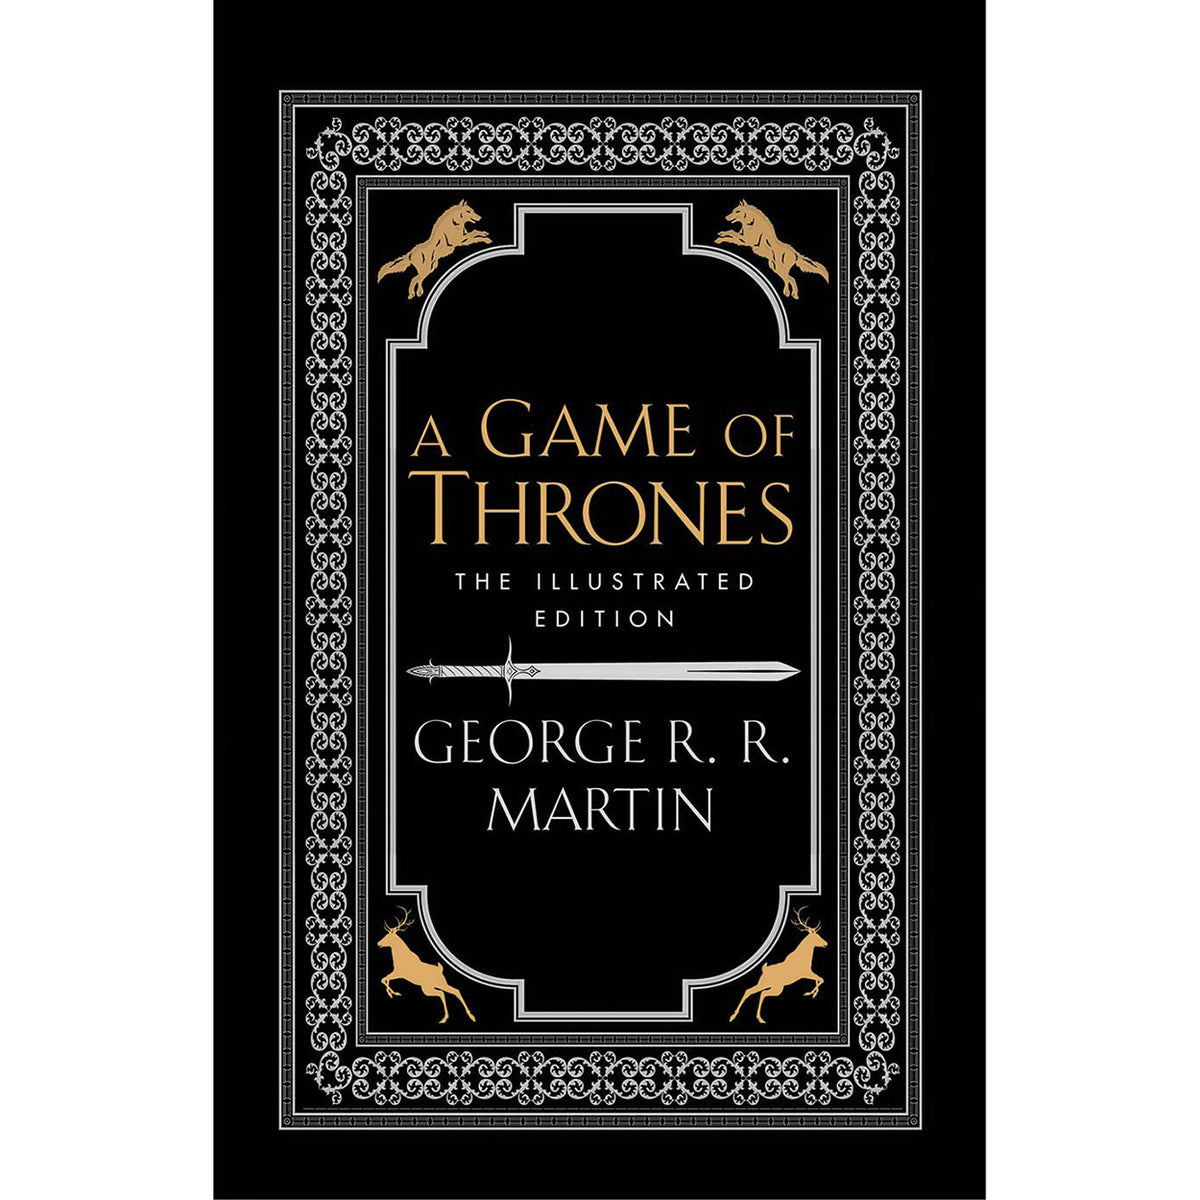 A Game of Thrones Illustrated Edition Front Cover (Hardback)